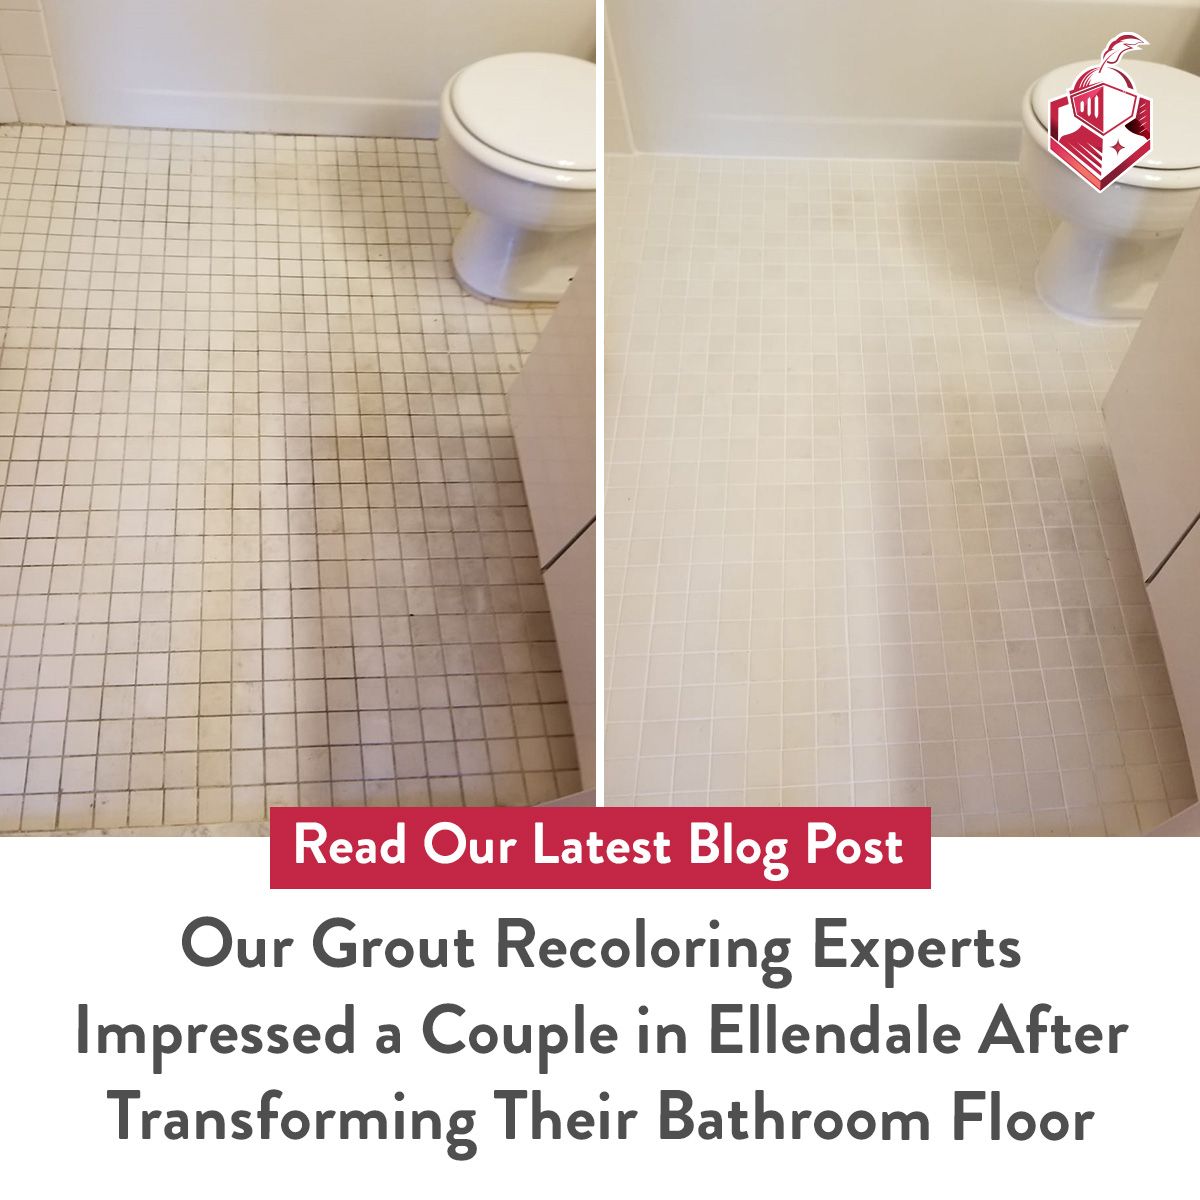 Our Grout Recoloring Experts Impressed a Couple in Ellendale After Transforming Their Bathroom Floor